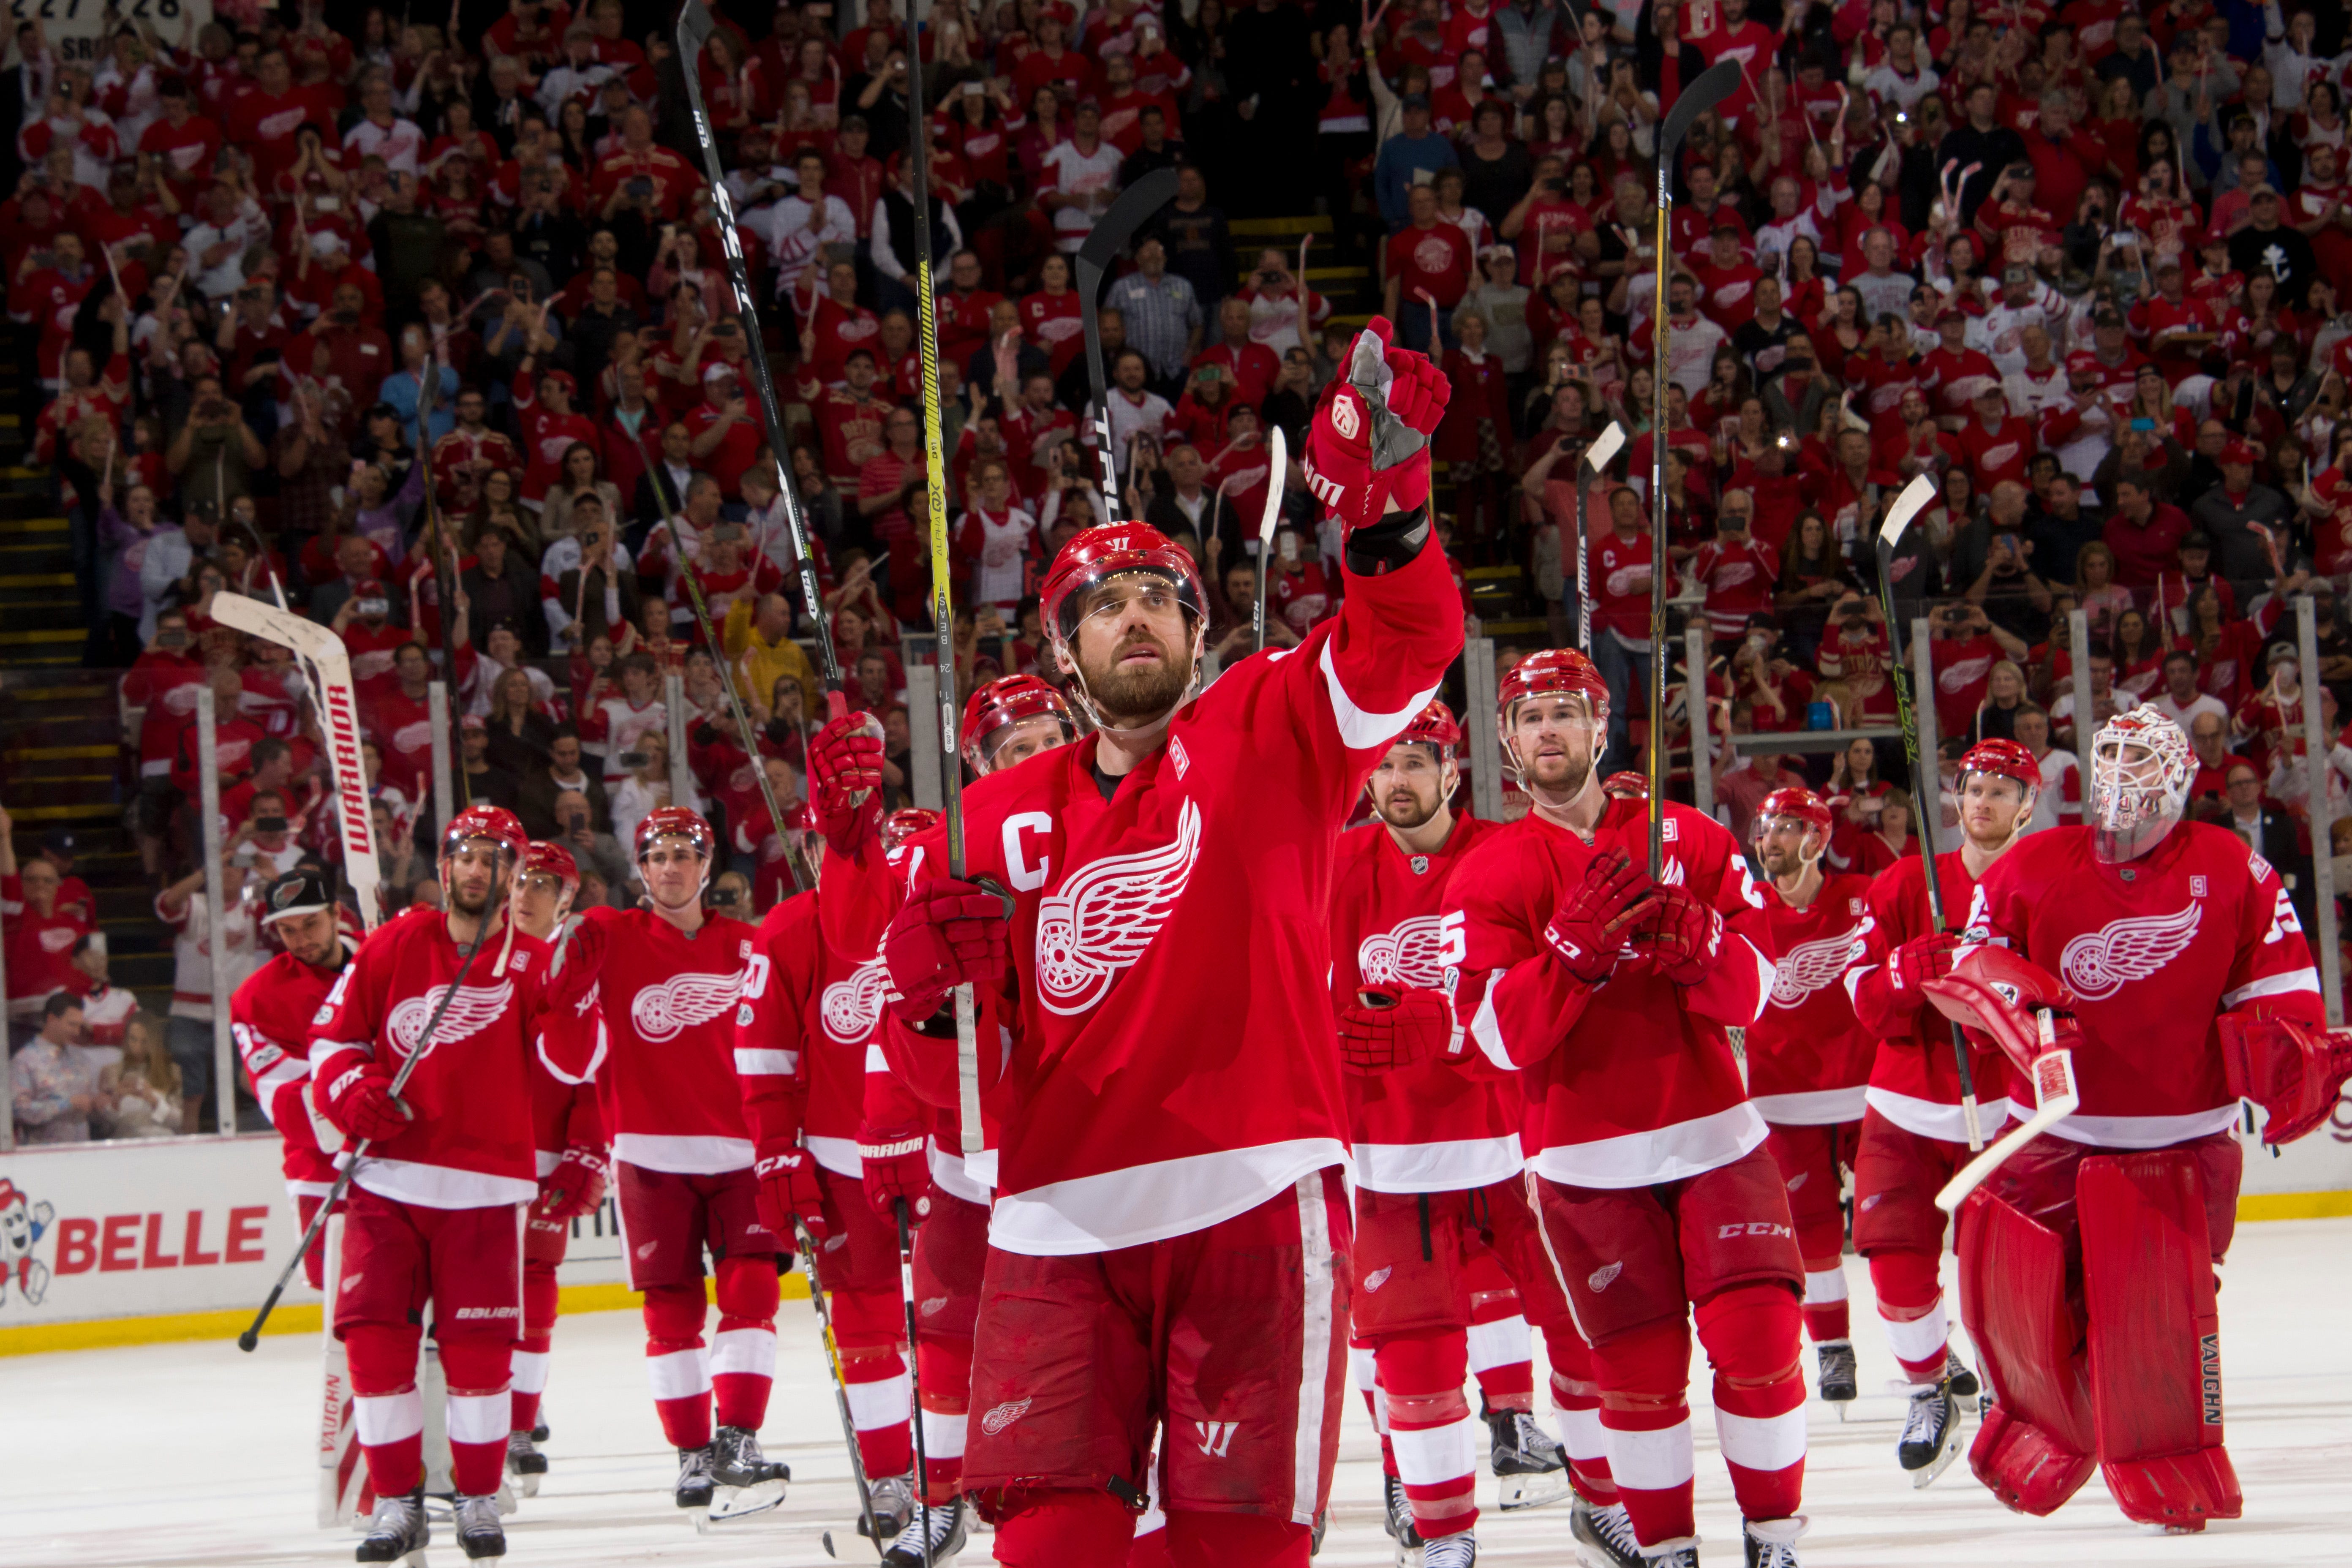 Henrik Zetterberg announced the end of his playing career Friday due to that troublesome back.